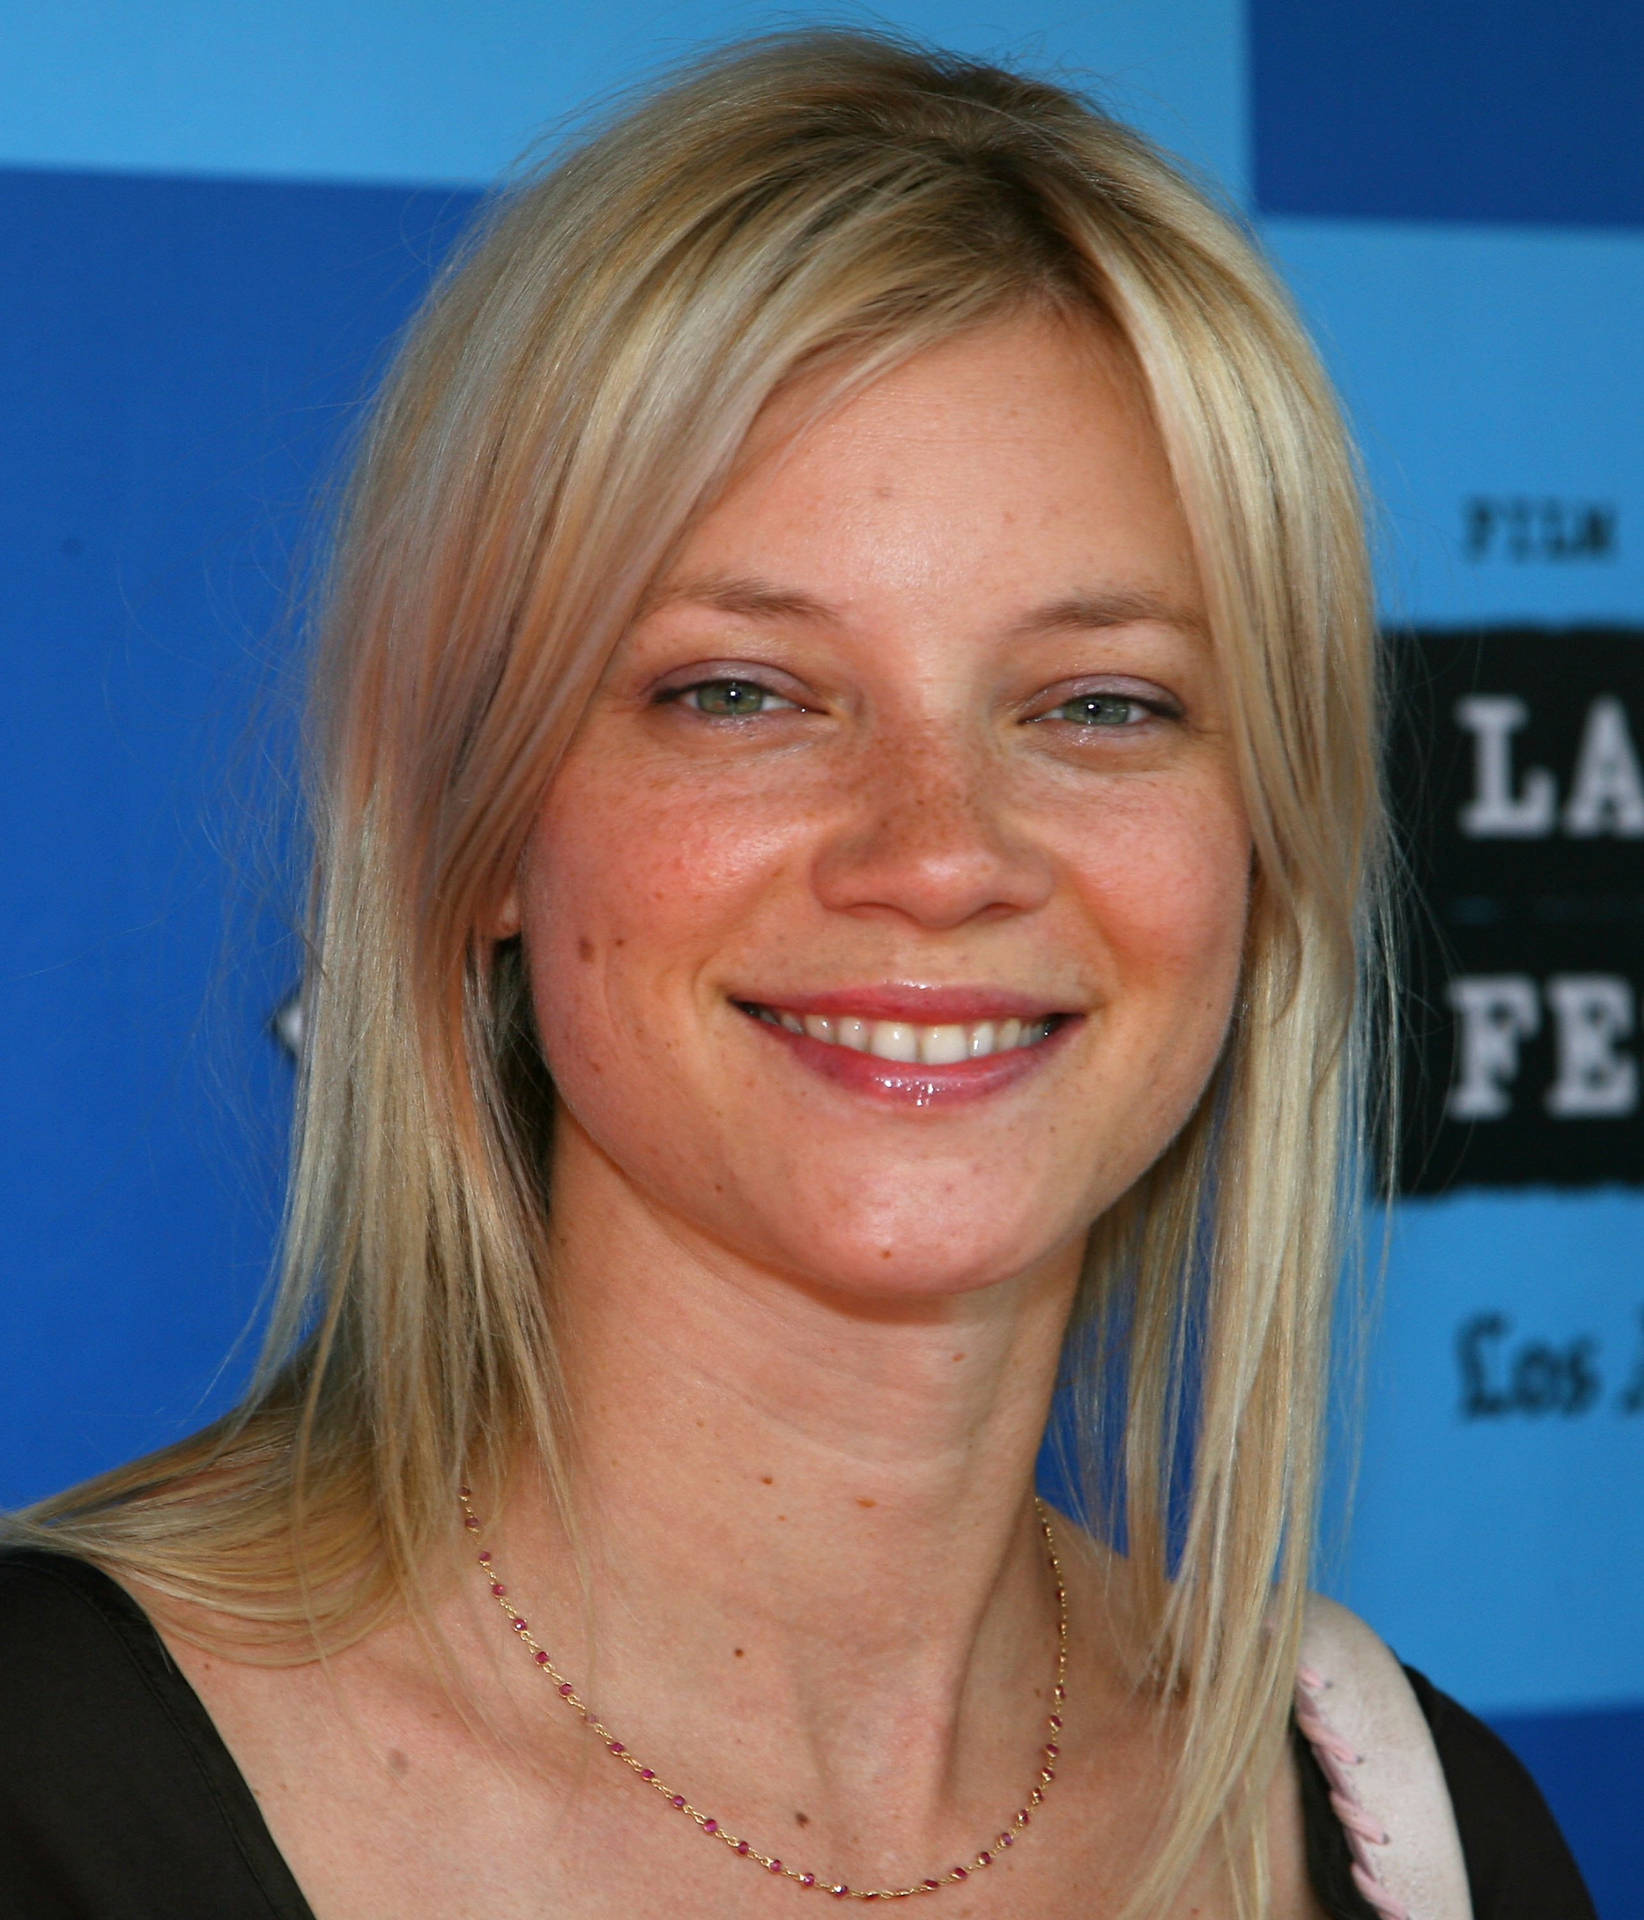 Smiling Actress Amy Smart in High Definition Wallpaper Wallpaper